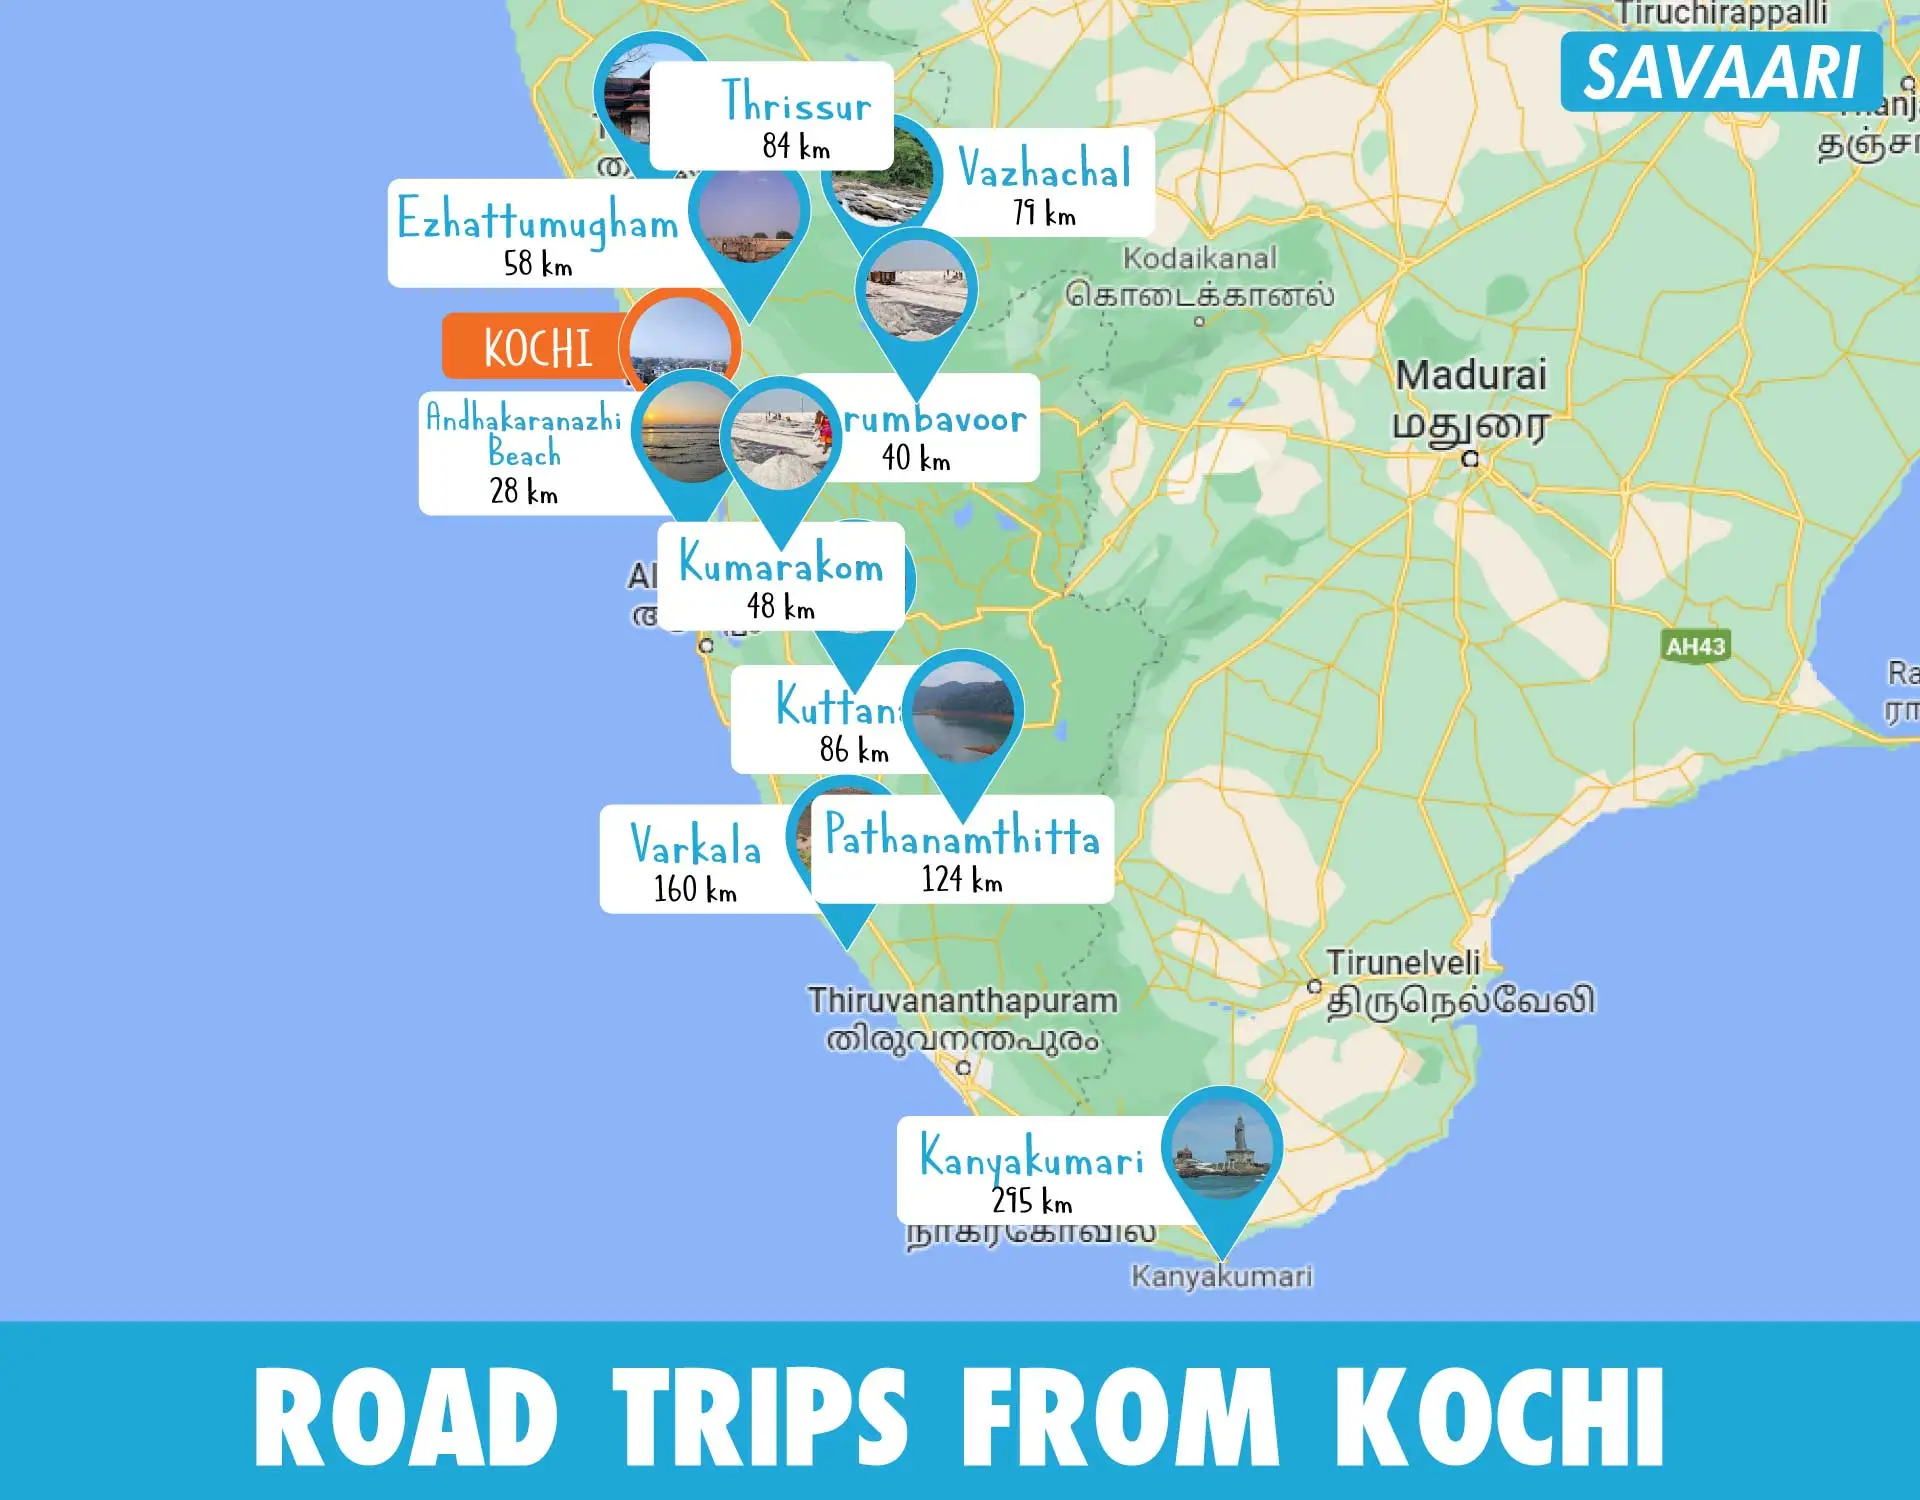 Places to visit near Kochi